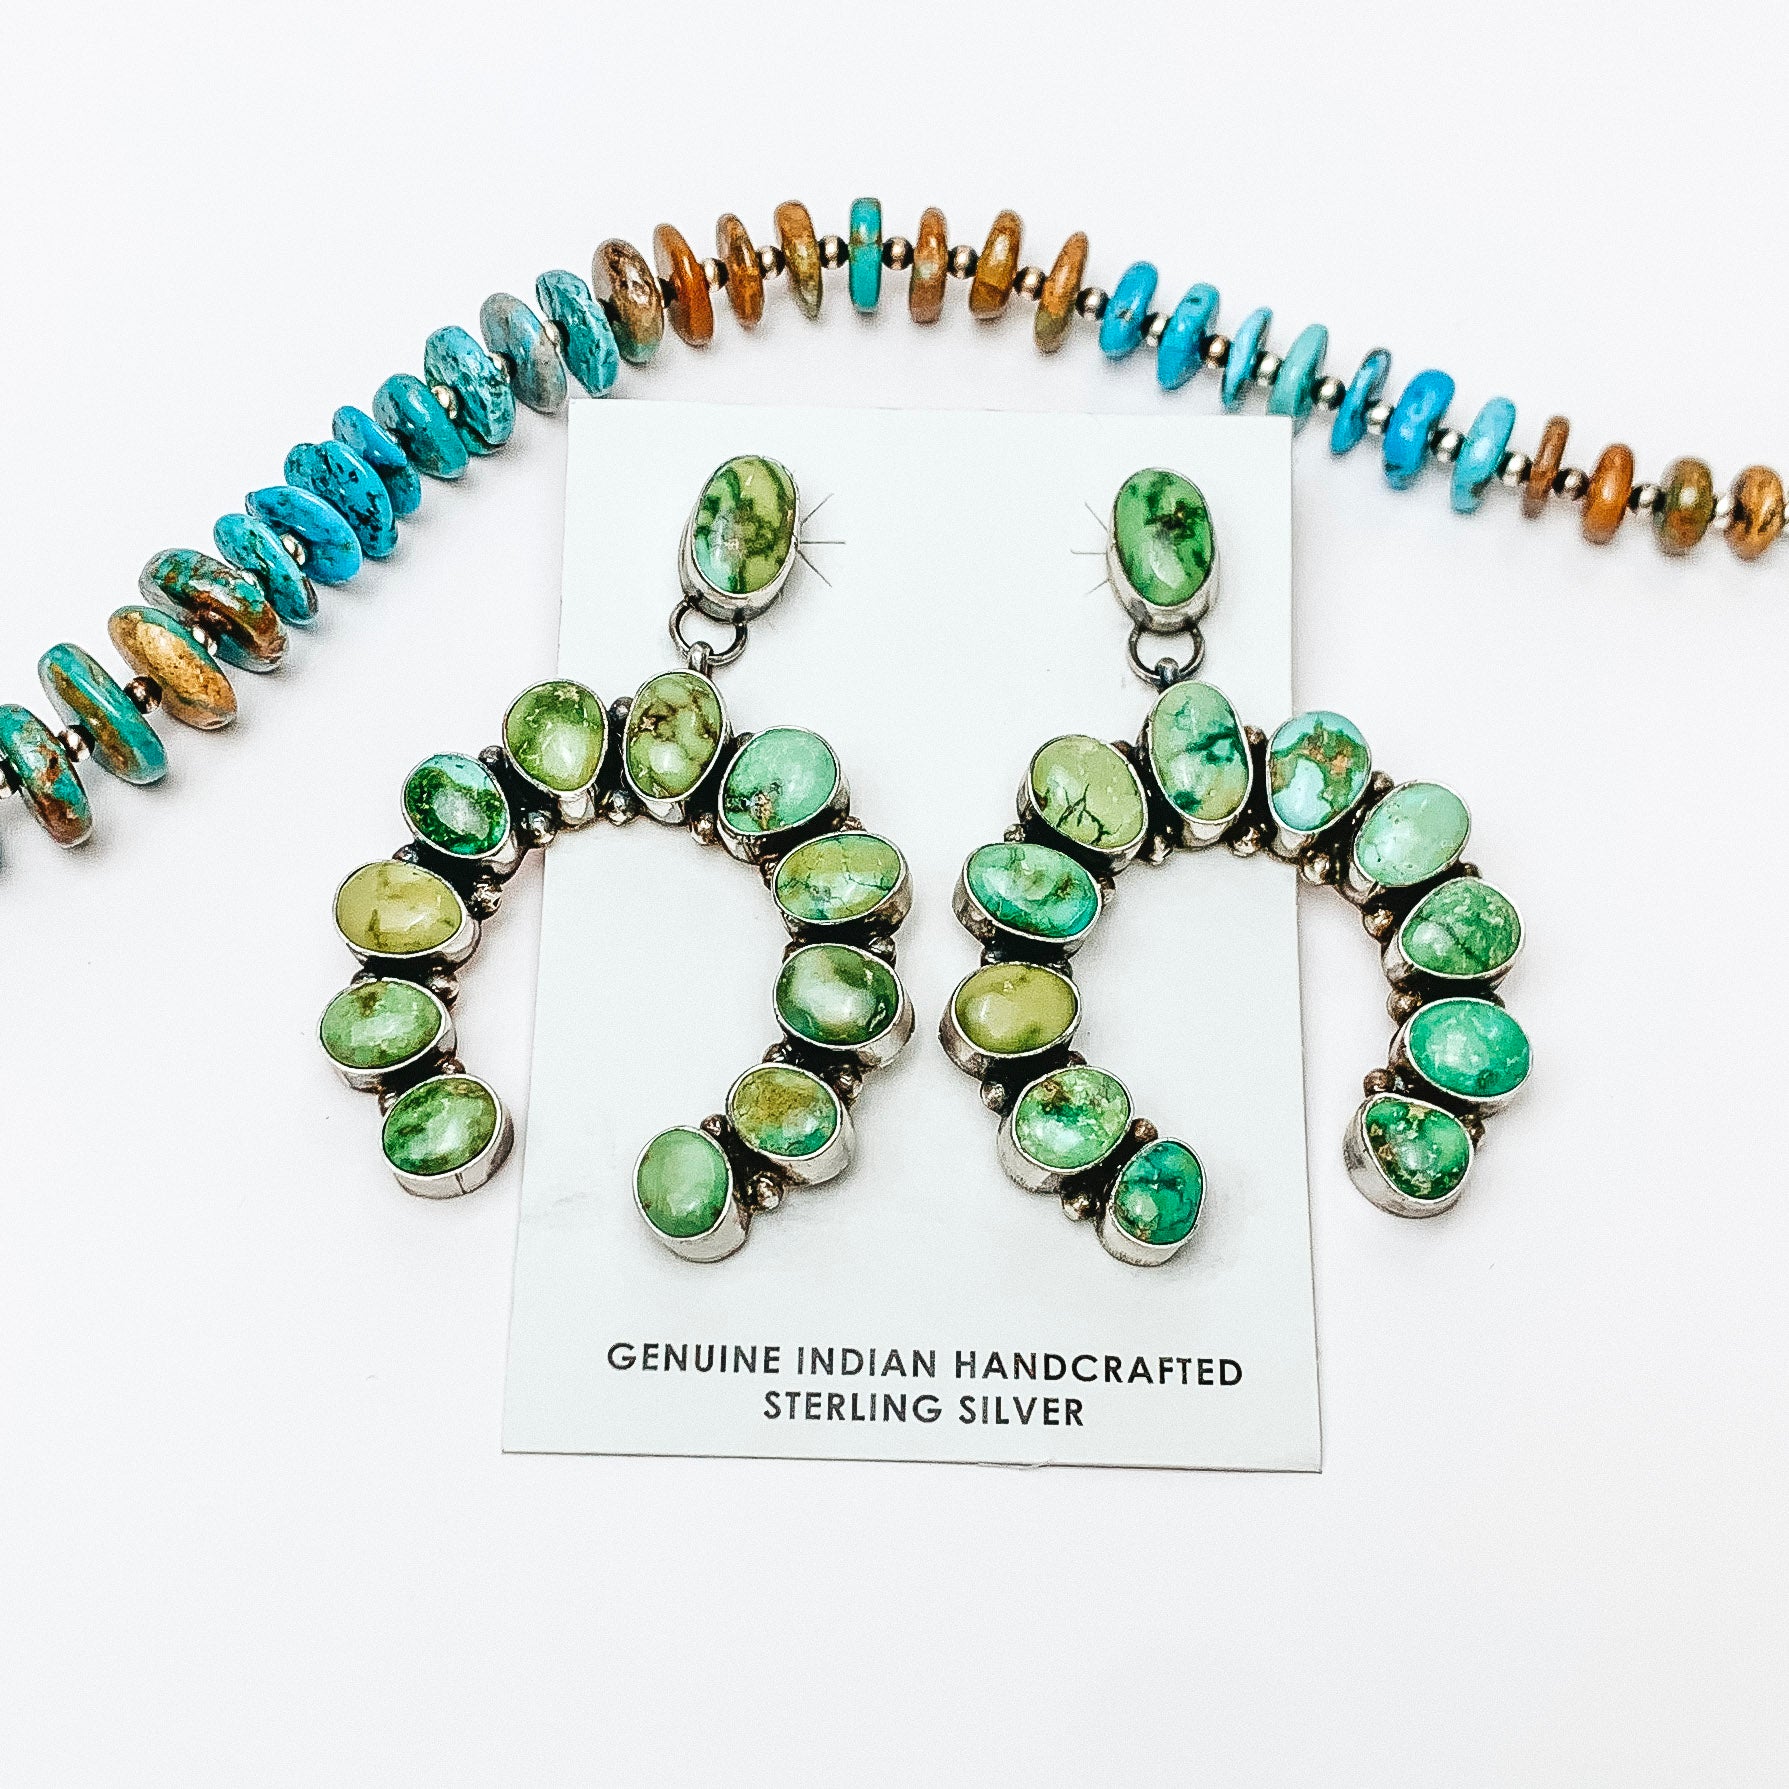 In the center of the picture is Naja shaped genuine Navajo earrings. A turquoise necklace is placed above the earrings. All on a white background. 